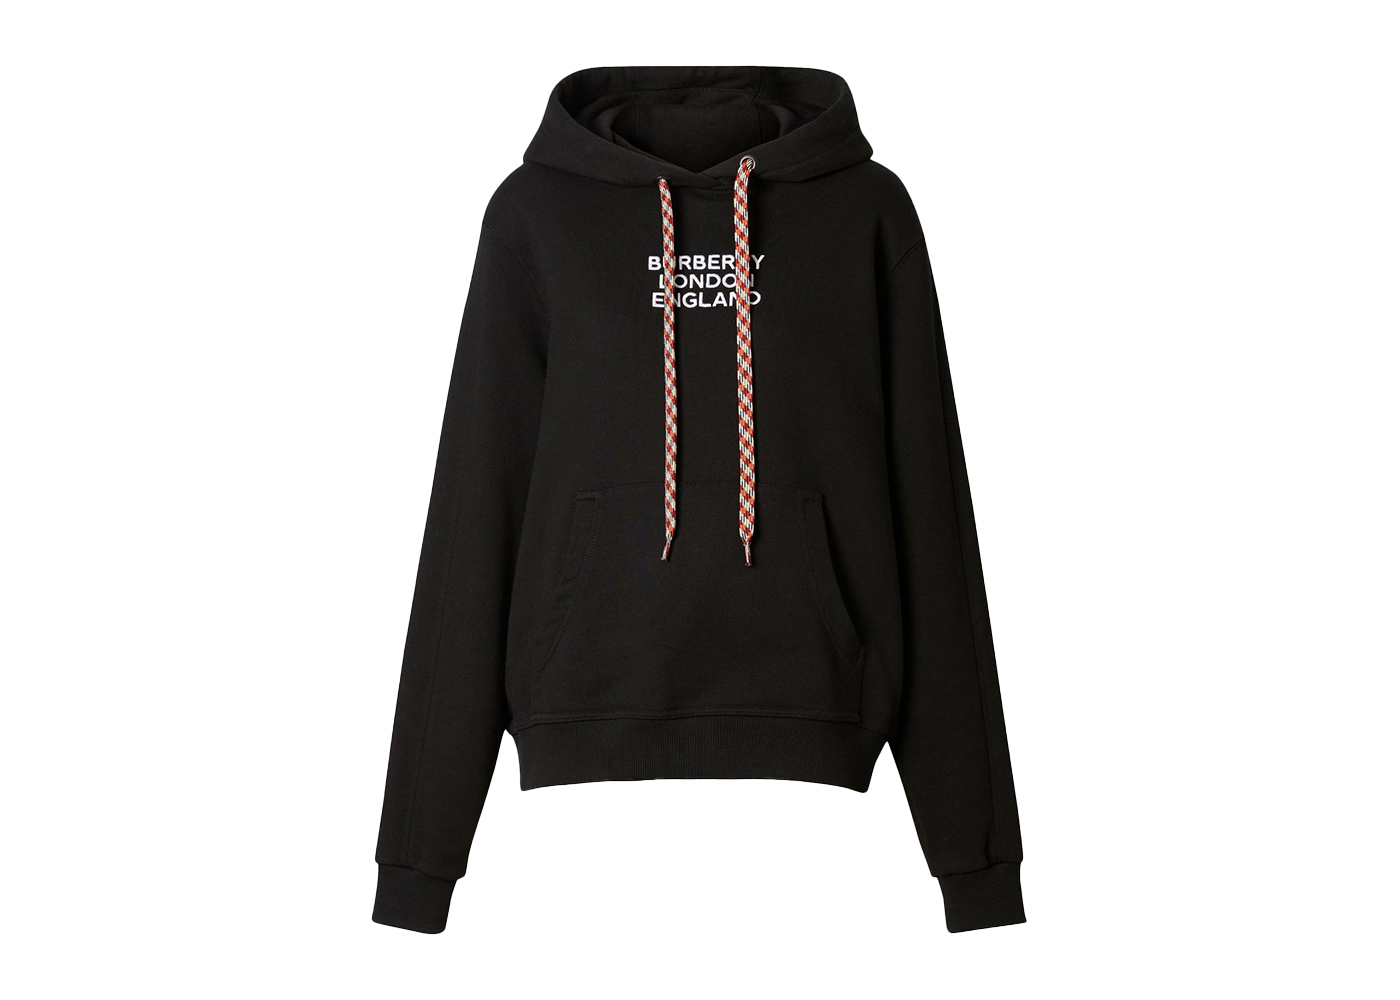 Burberry Women's Embroidered Logo Oversized Hoodie Black - US